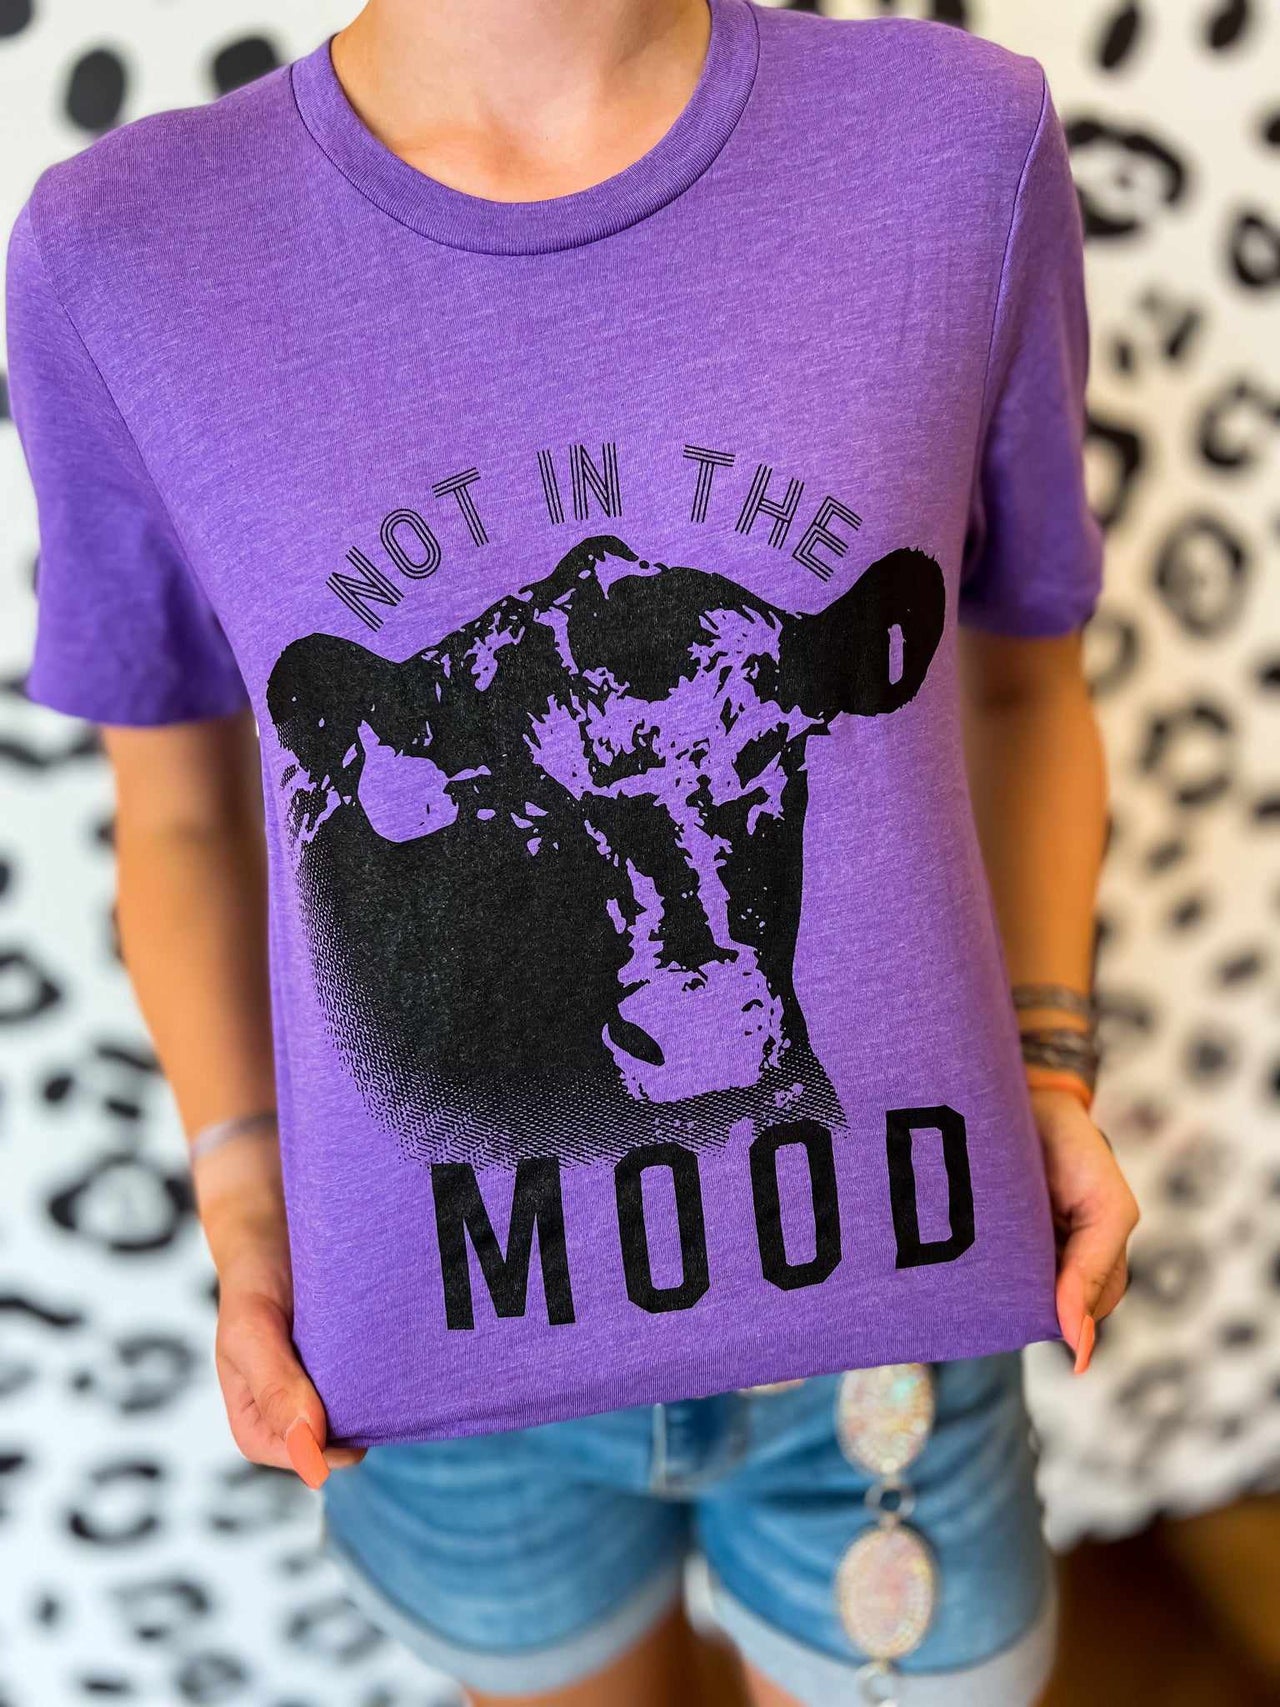 Not in the Mood" Cow graphic tee for women.